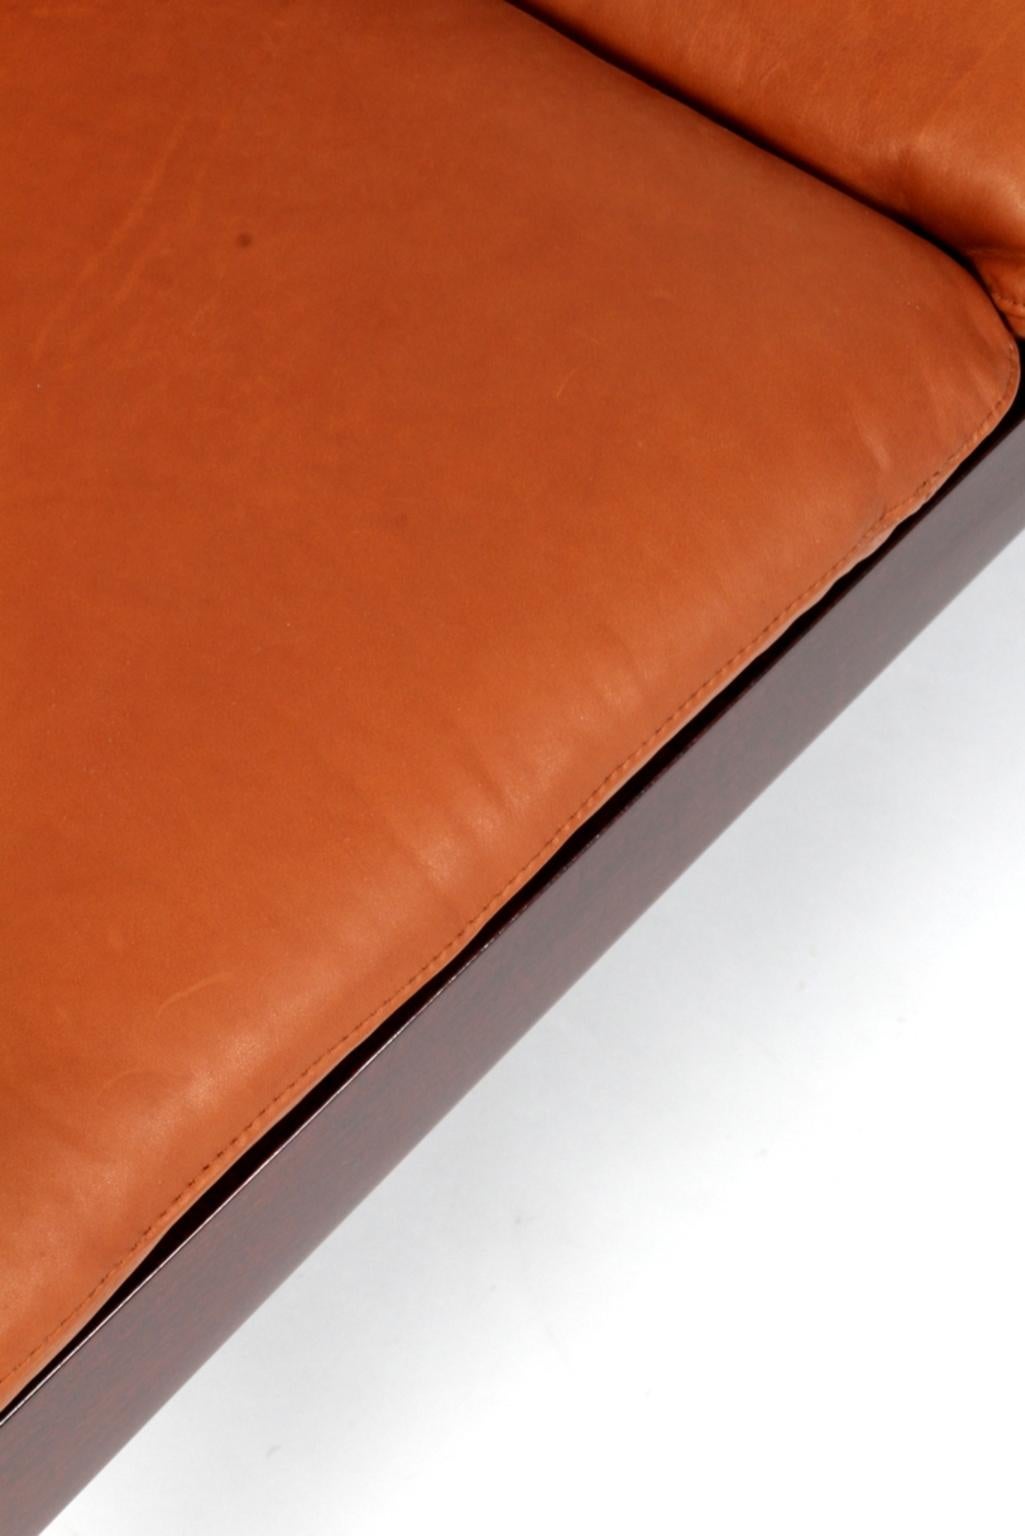 Ole Wanscher Two-Seat Sofa in Cognac Aniline Leather, Model PJ112, Mahogany In Good Condition In Esbjerg, DK